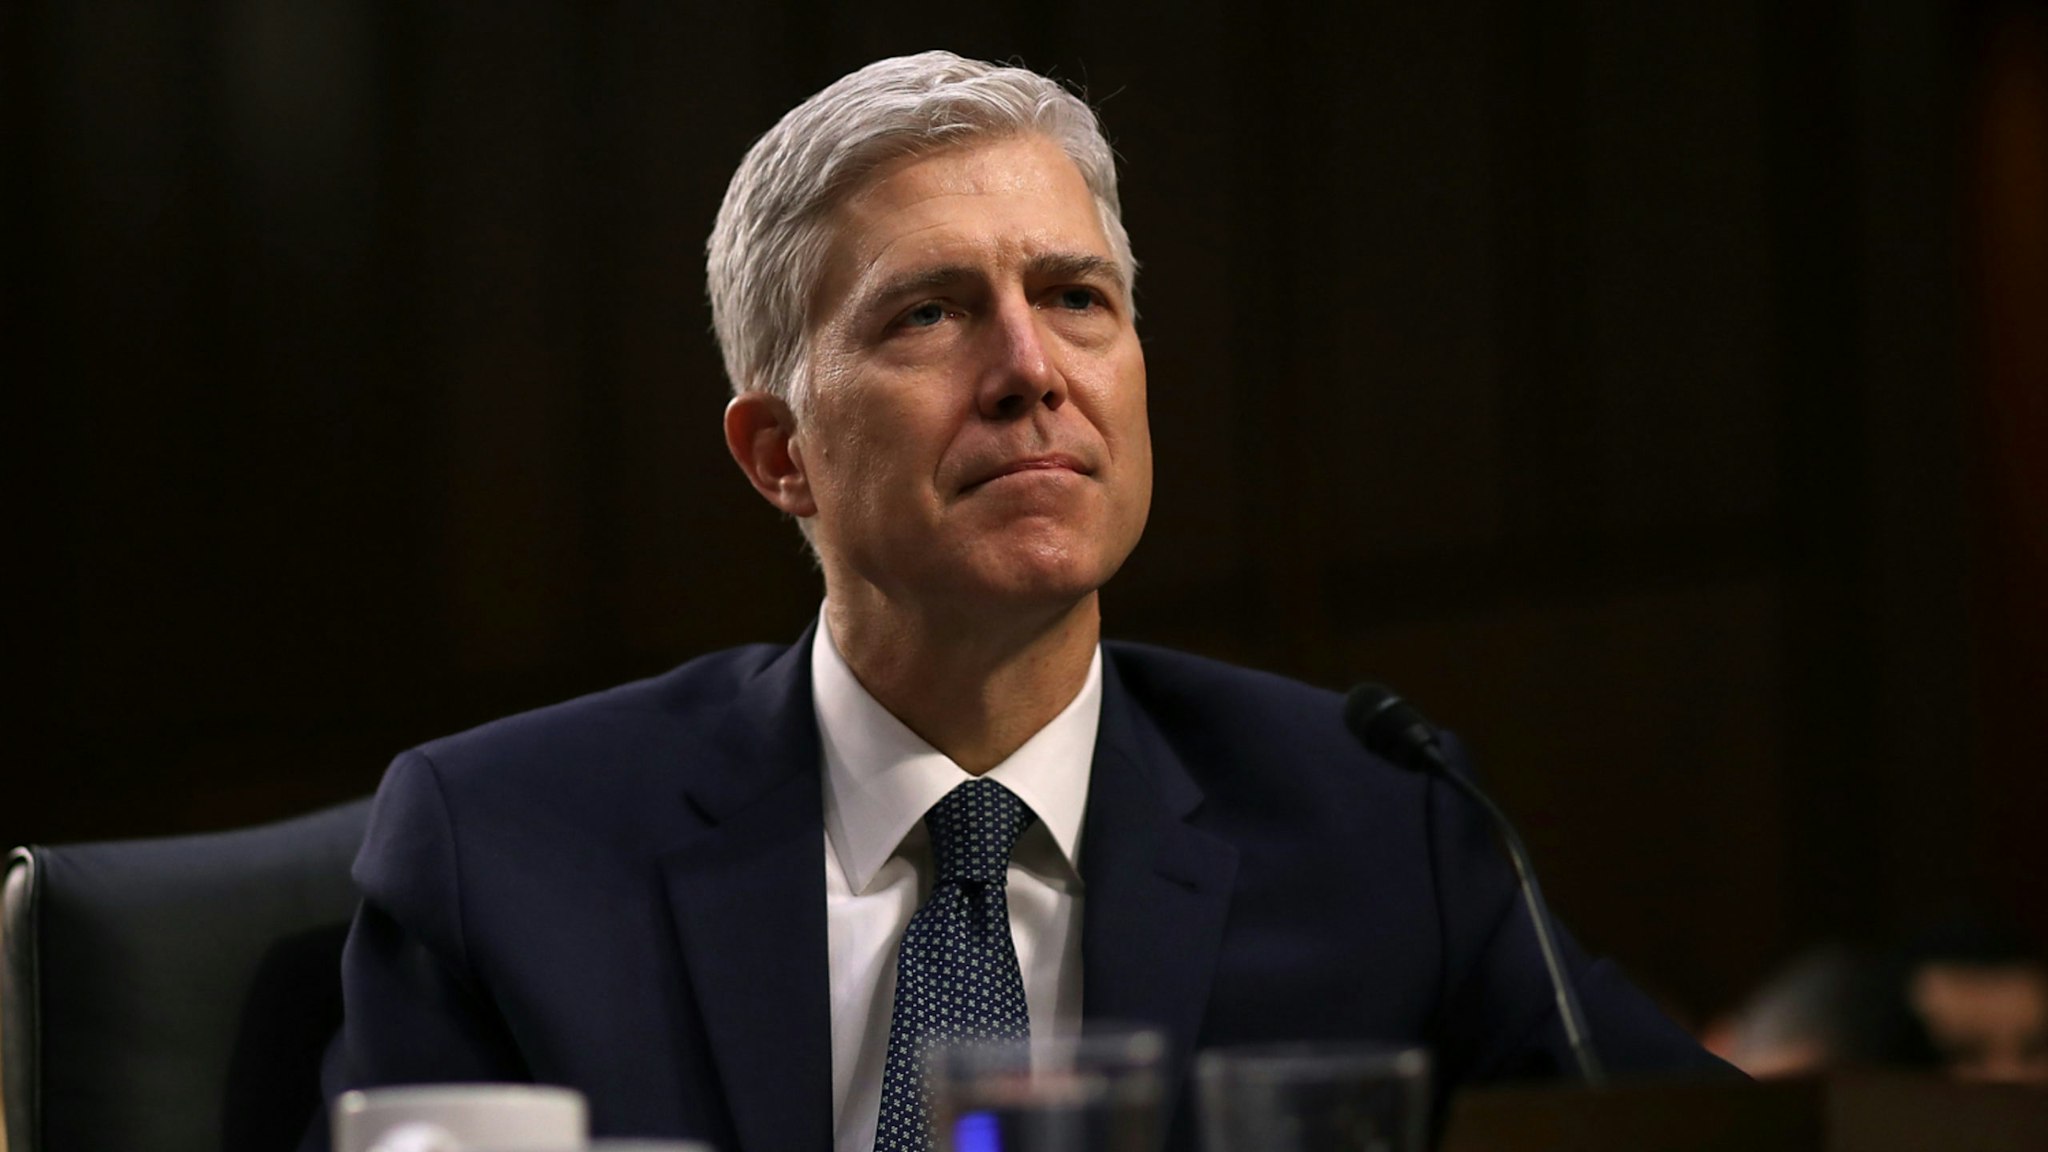 Judge Neil Gorsuch testifies during the third day of his Supreme Court confirmation hearing before the Senate Judiciary Committee in the Hart Senate Office Building on Capitol Hill, March 22, 2017 in Washington.